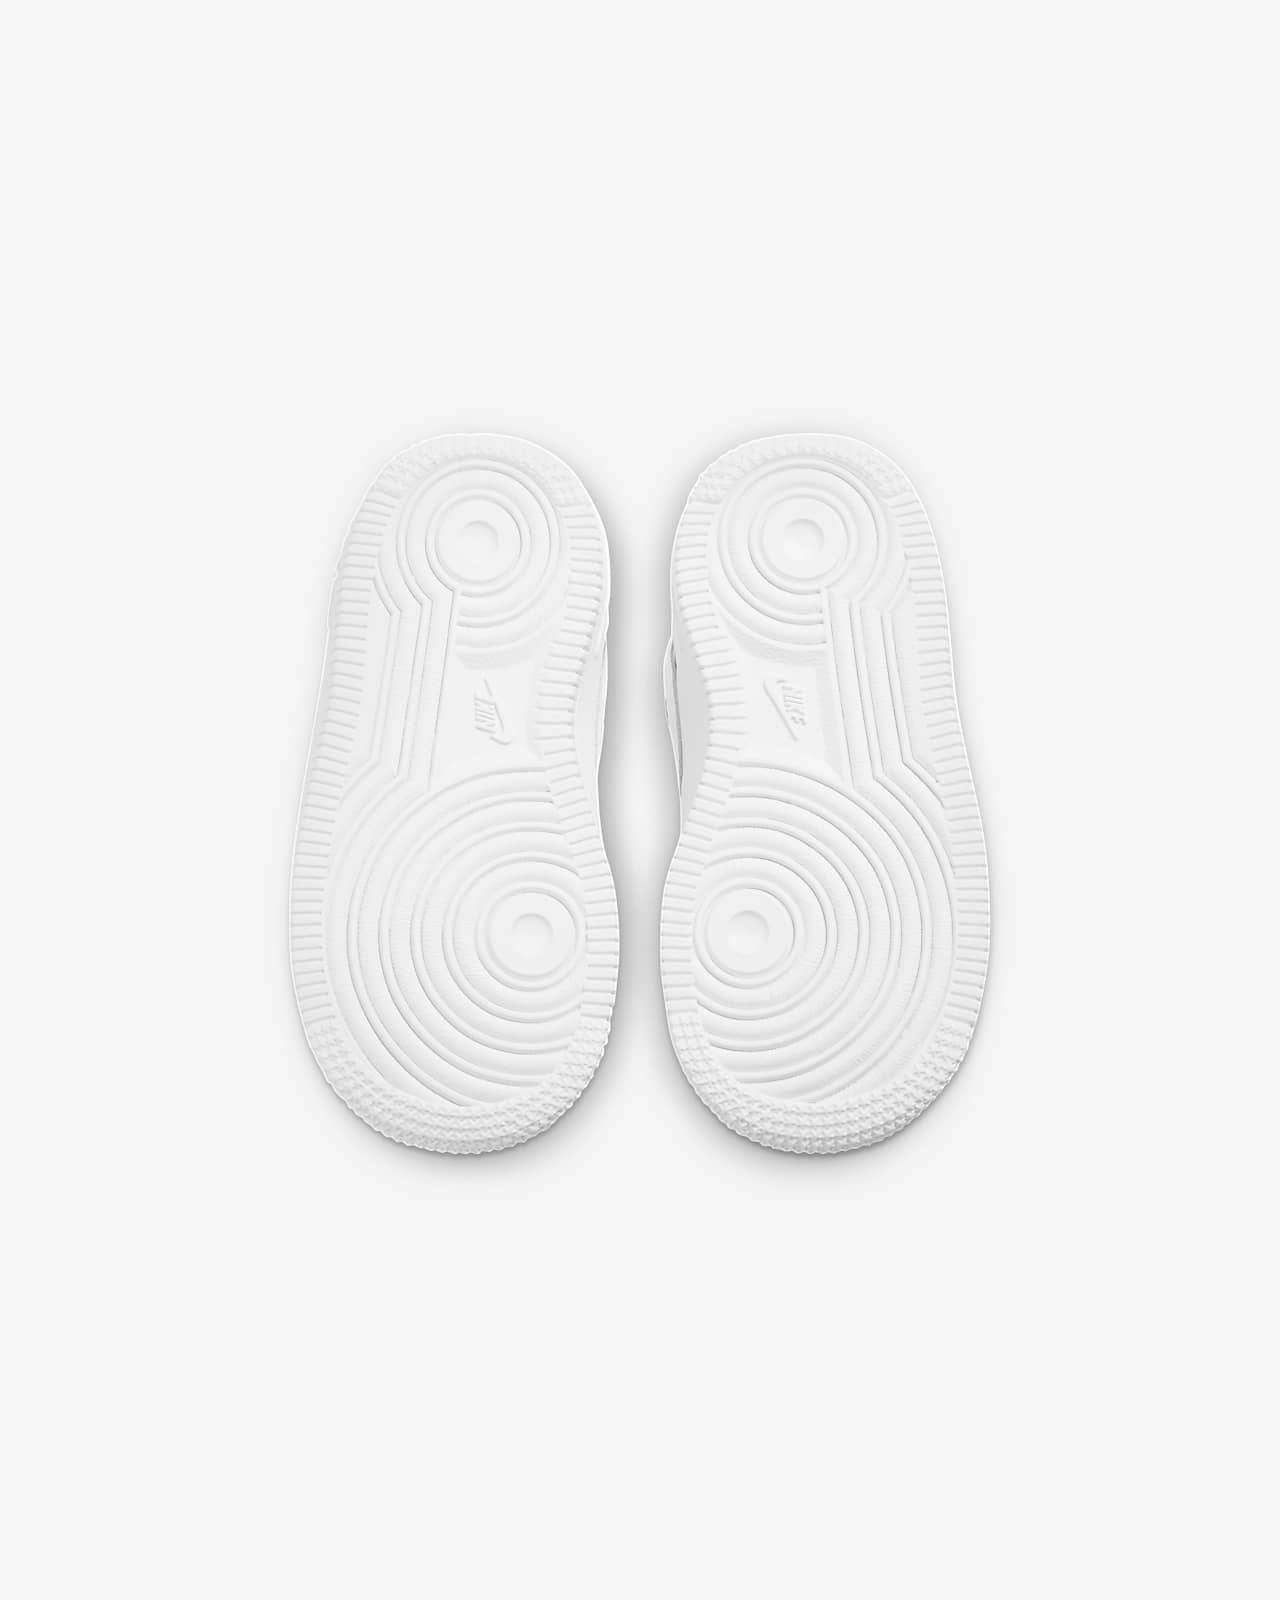 Nike Force LE Baby/Toddler Shoe.